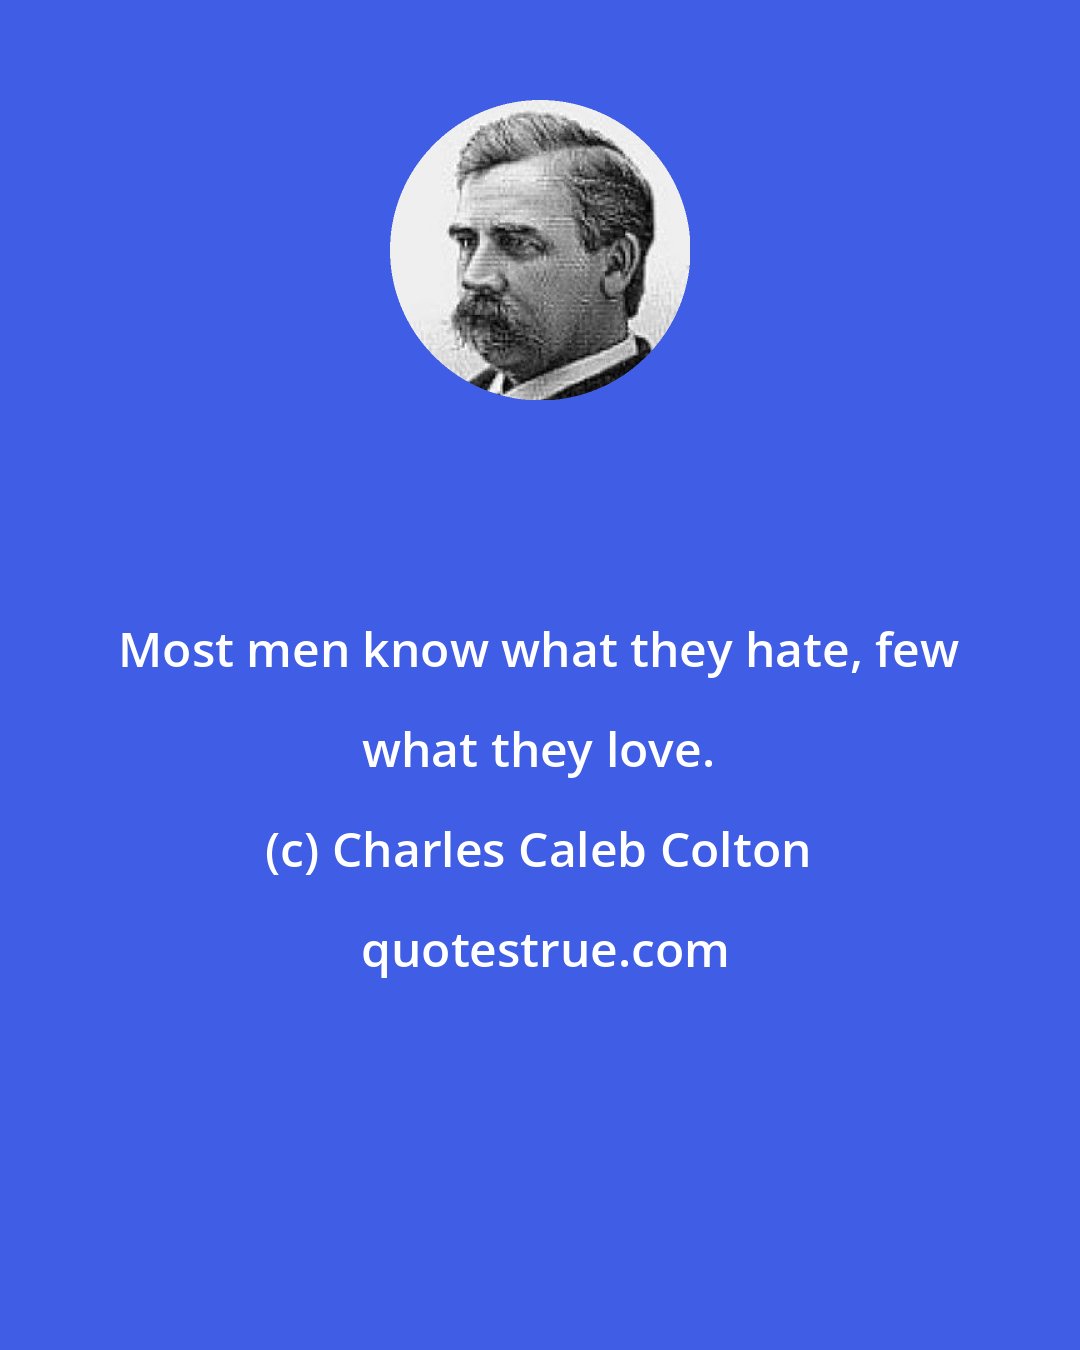 Charles Caleb Colton: Most men know what they hate, few what they love.